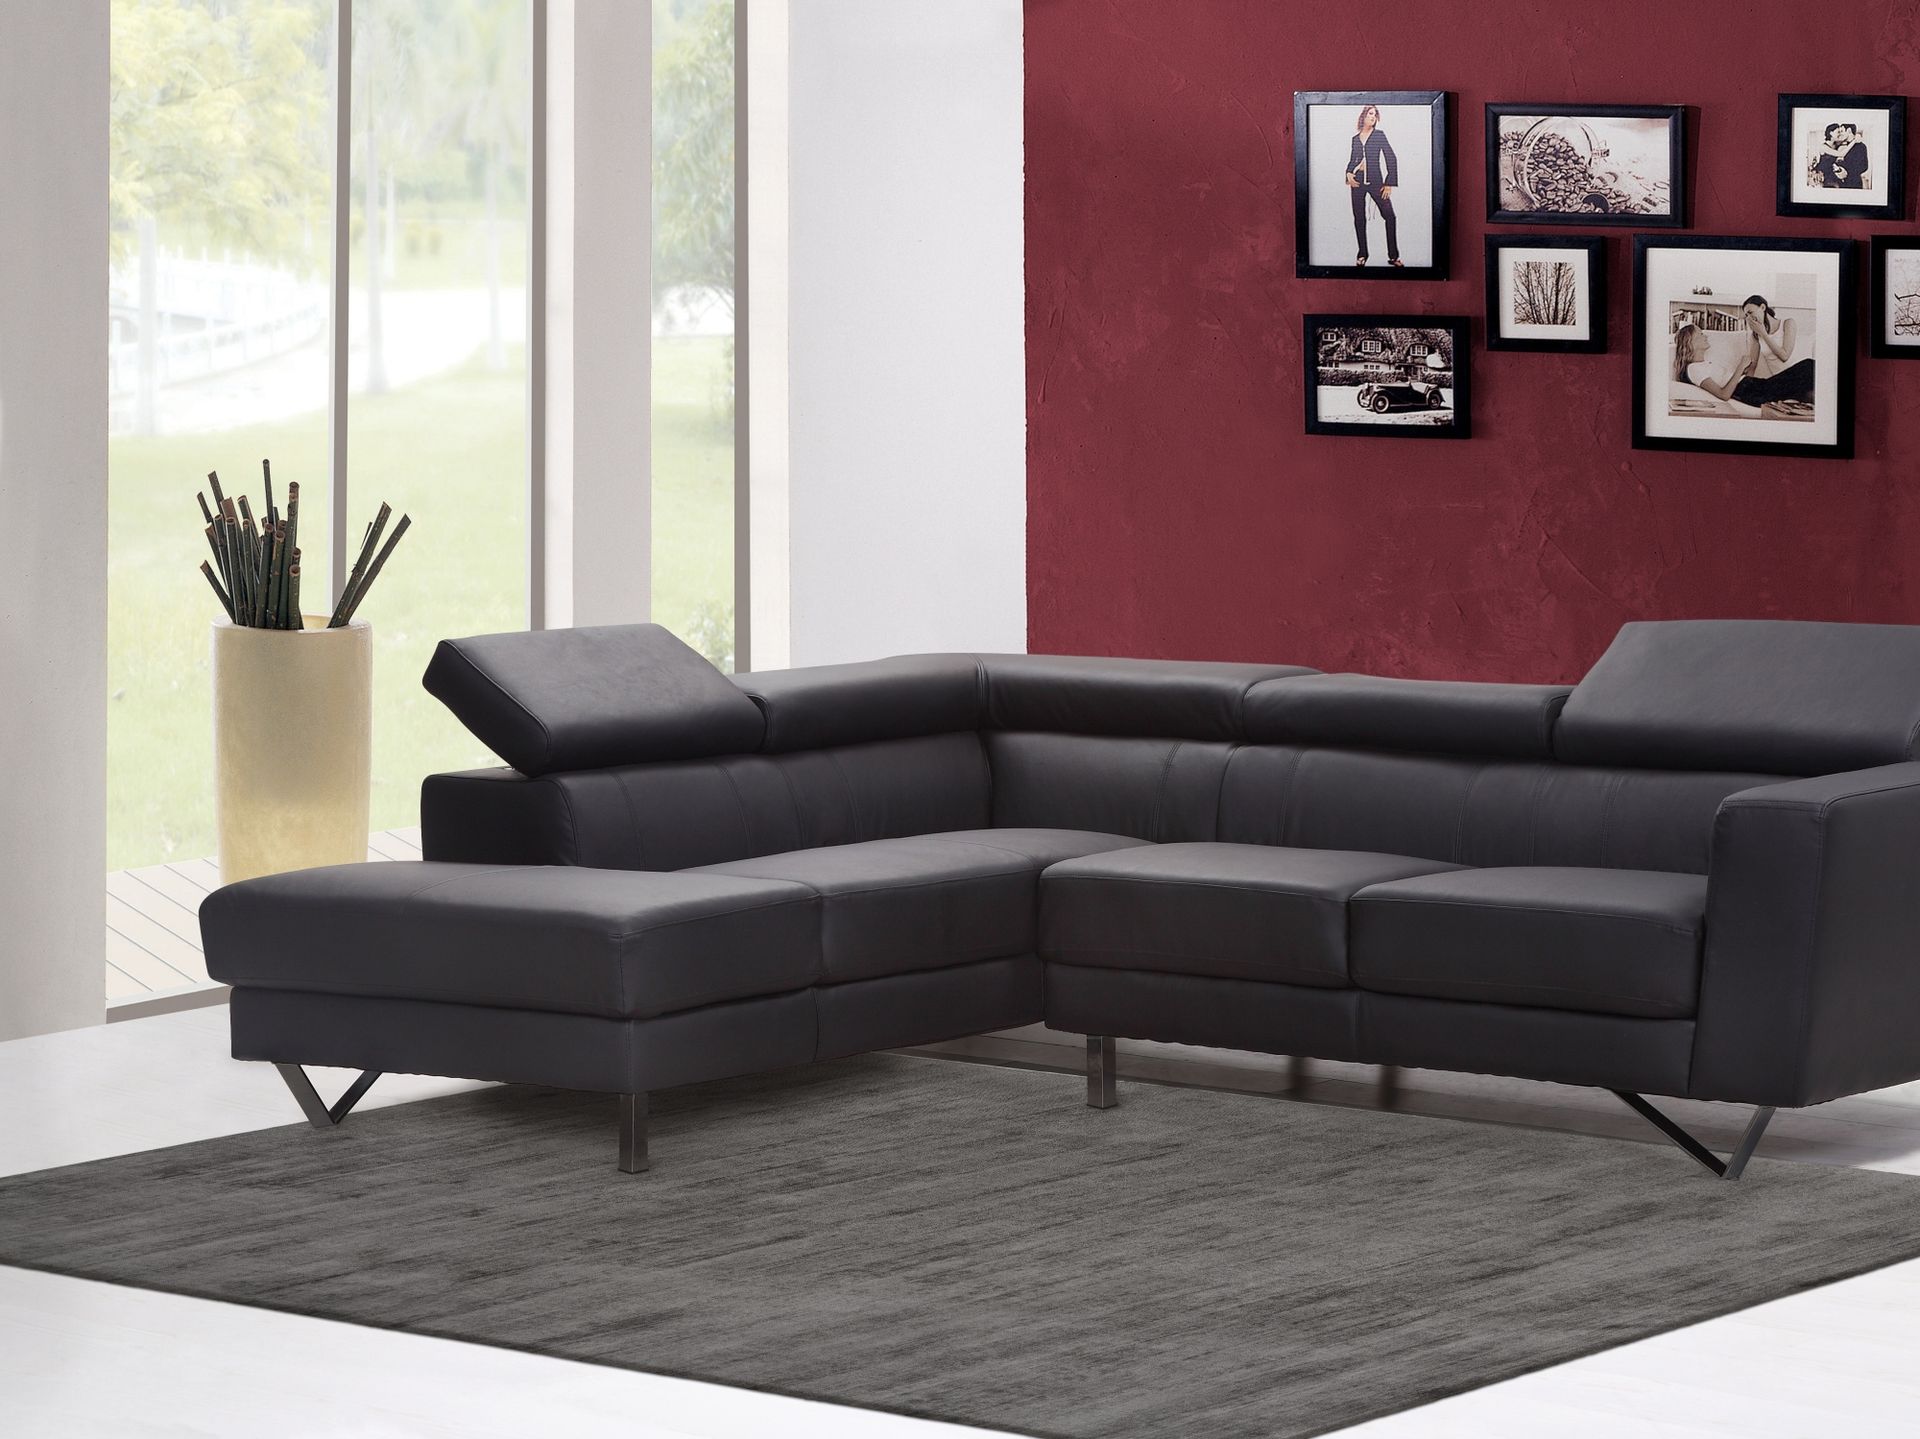 Photo of a gray lyocell rug with cut and loop optic in a modern living room with a black couch.